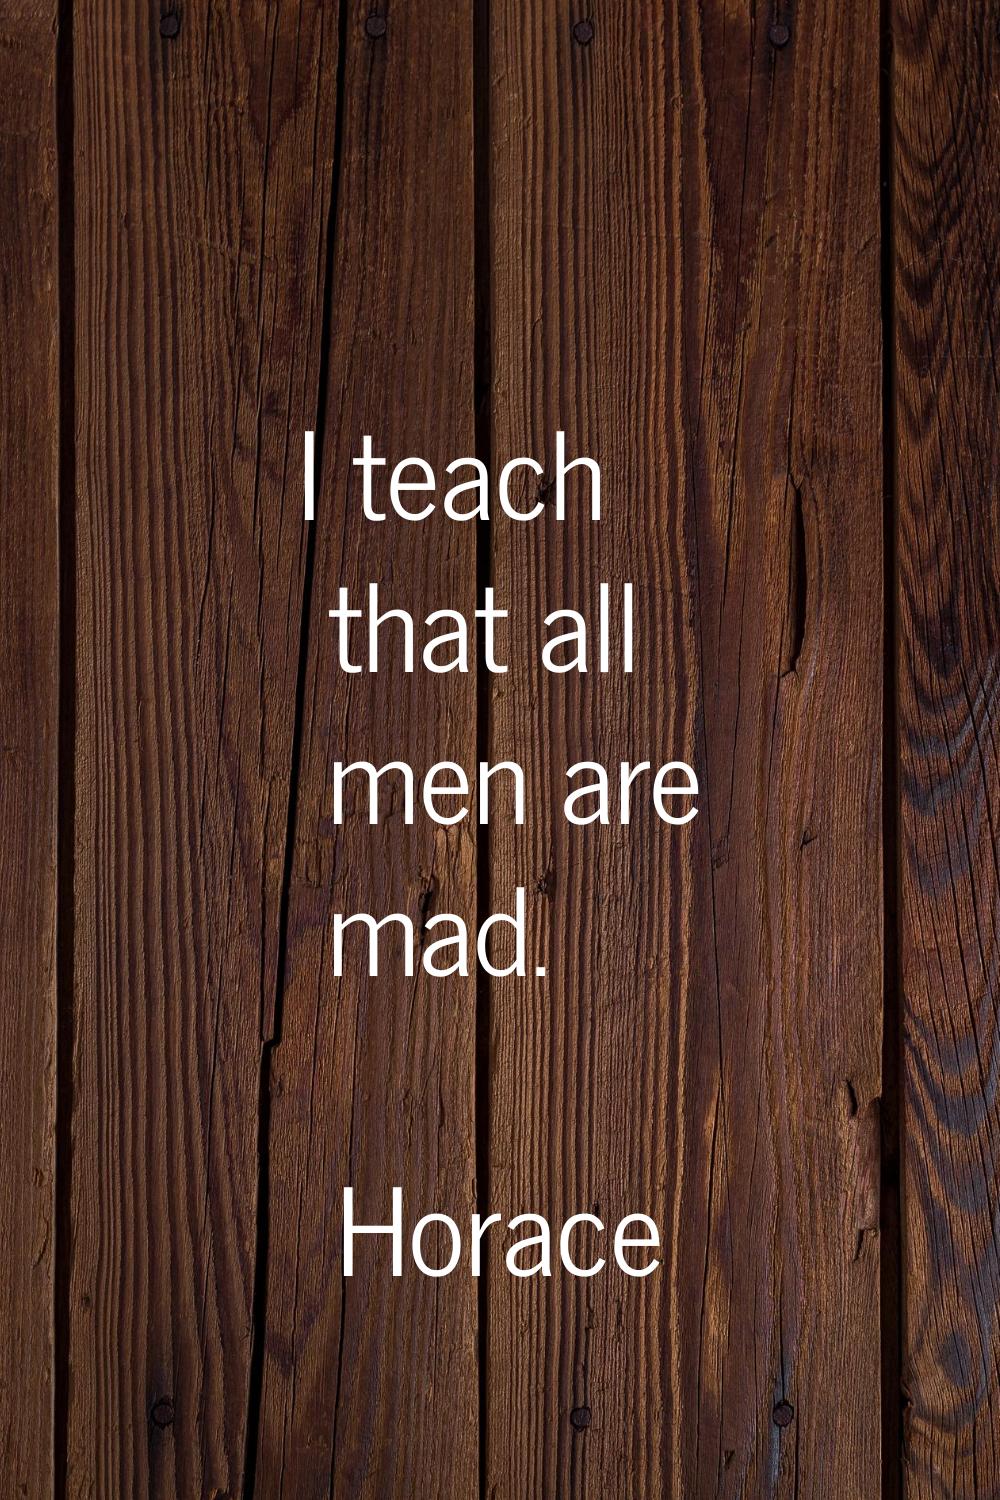 I teach that all men are mad.